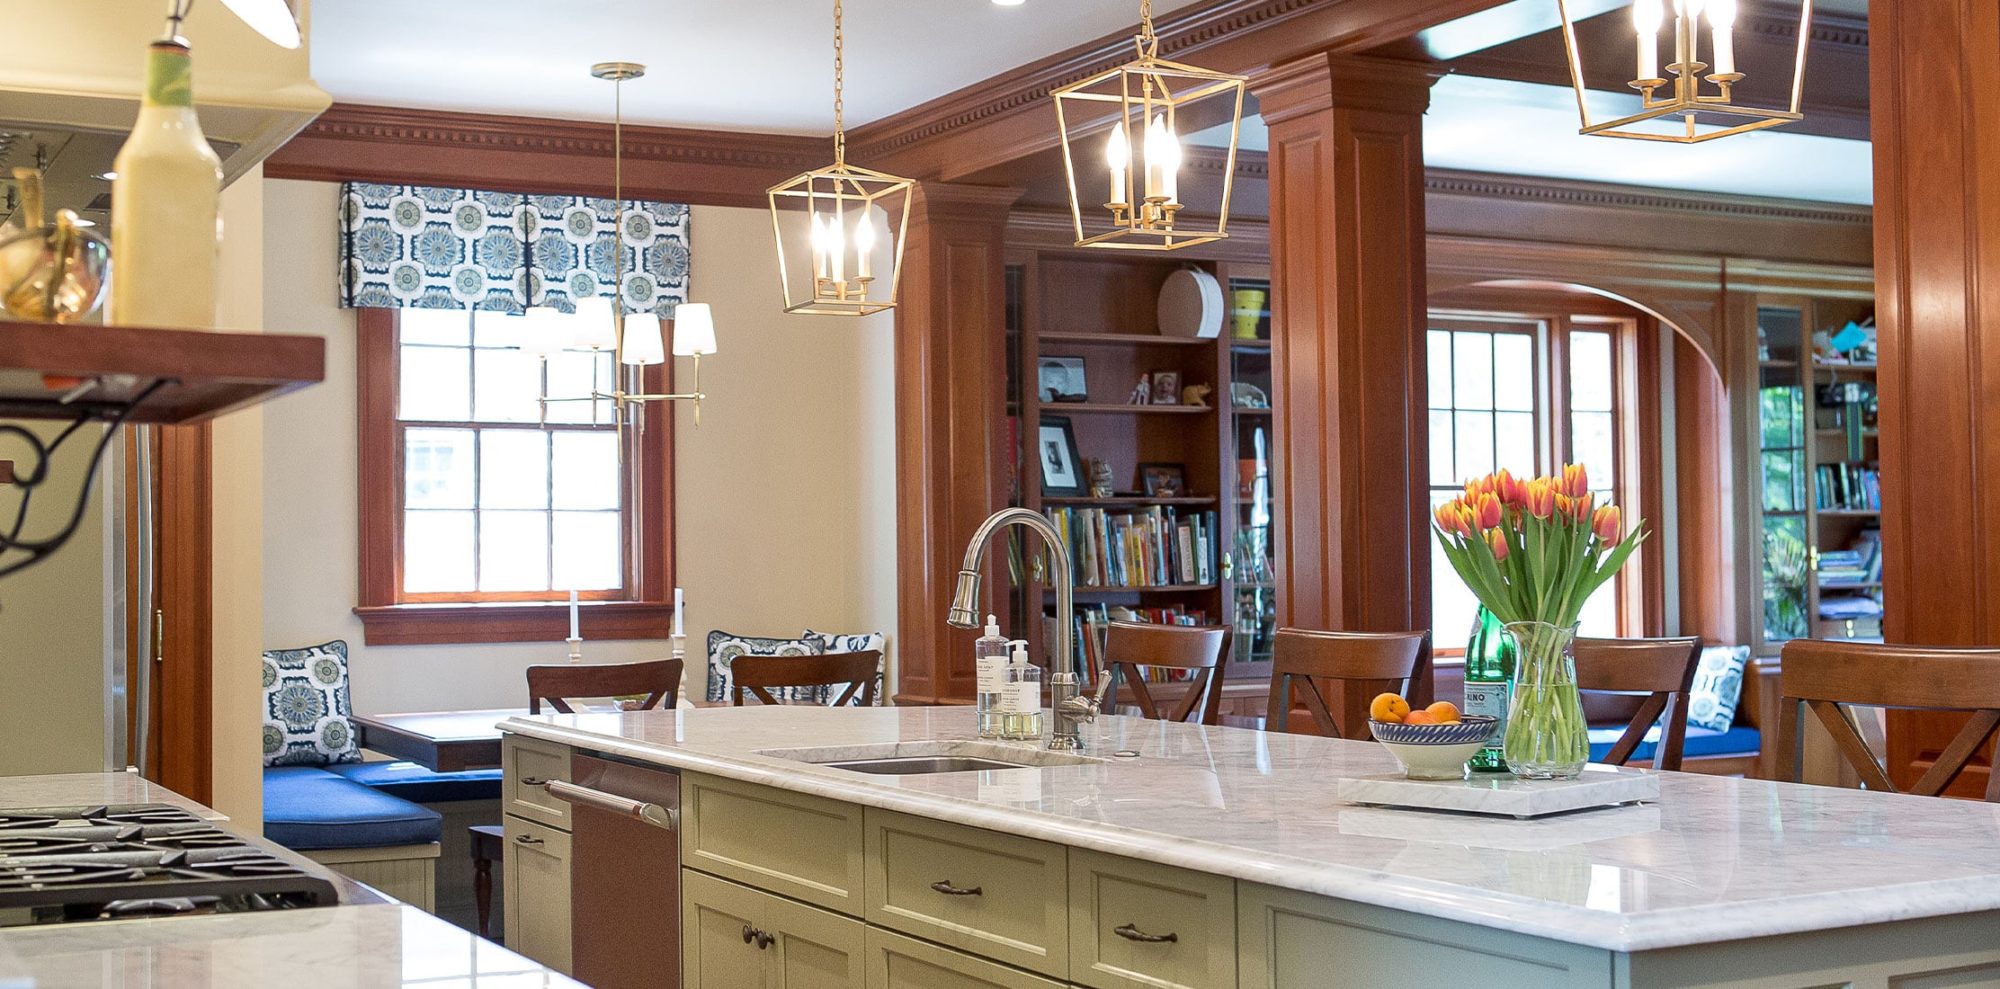 Open concept kitchen with pendant lights